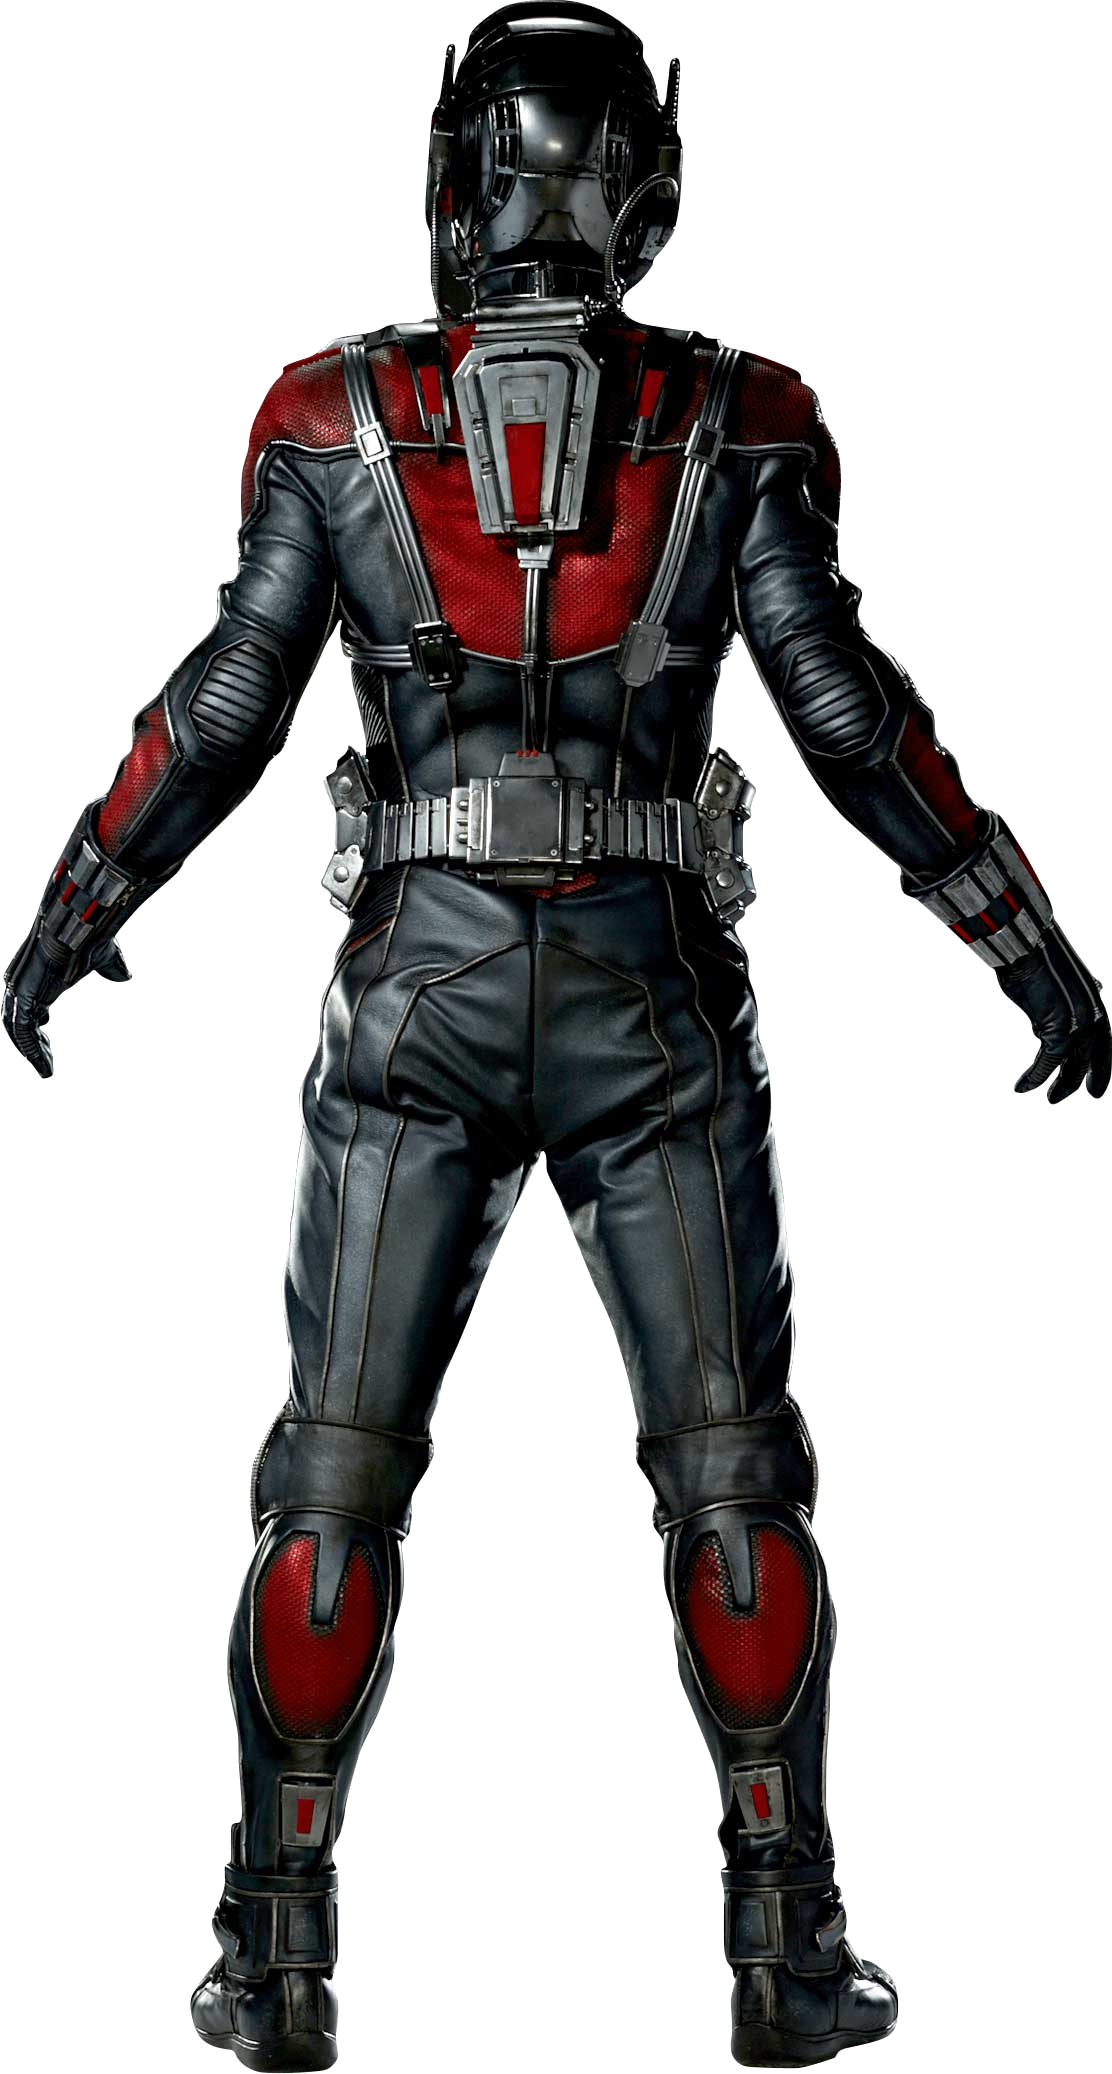 Ant-Man Pre-Order is Now Avai